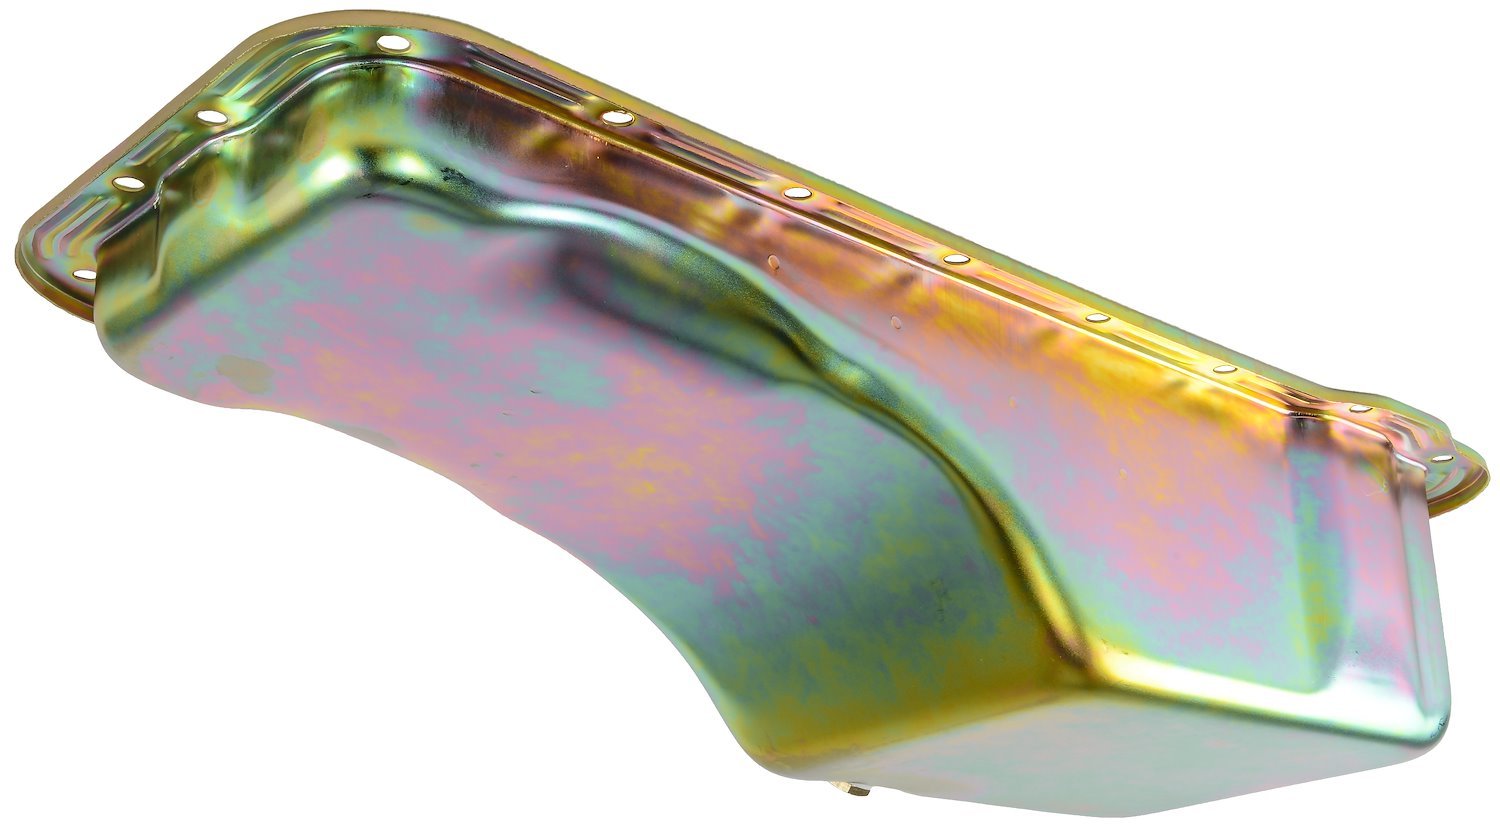 Stock-Style Replacement Oil Pan for 1958-1971 Ford FE 352-428 [Gold Zinc]